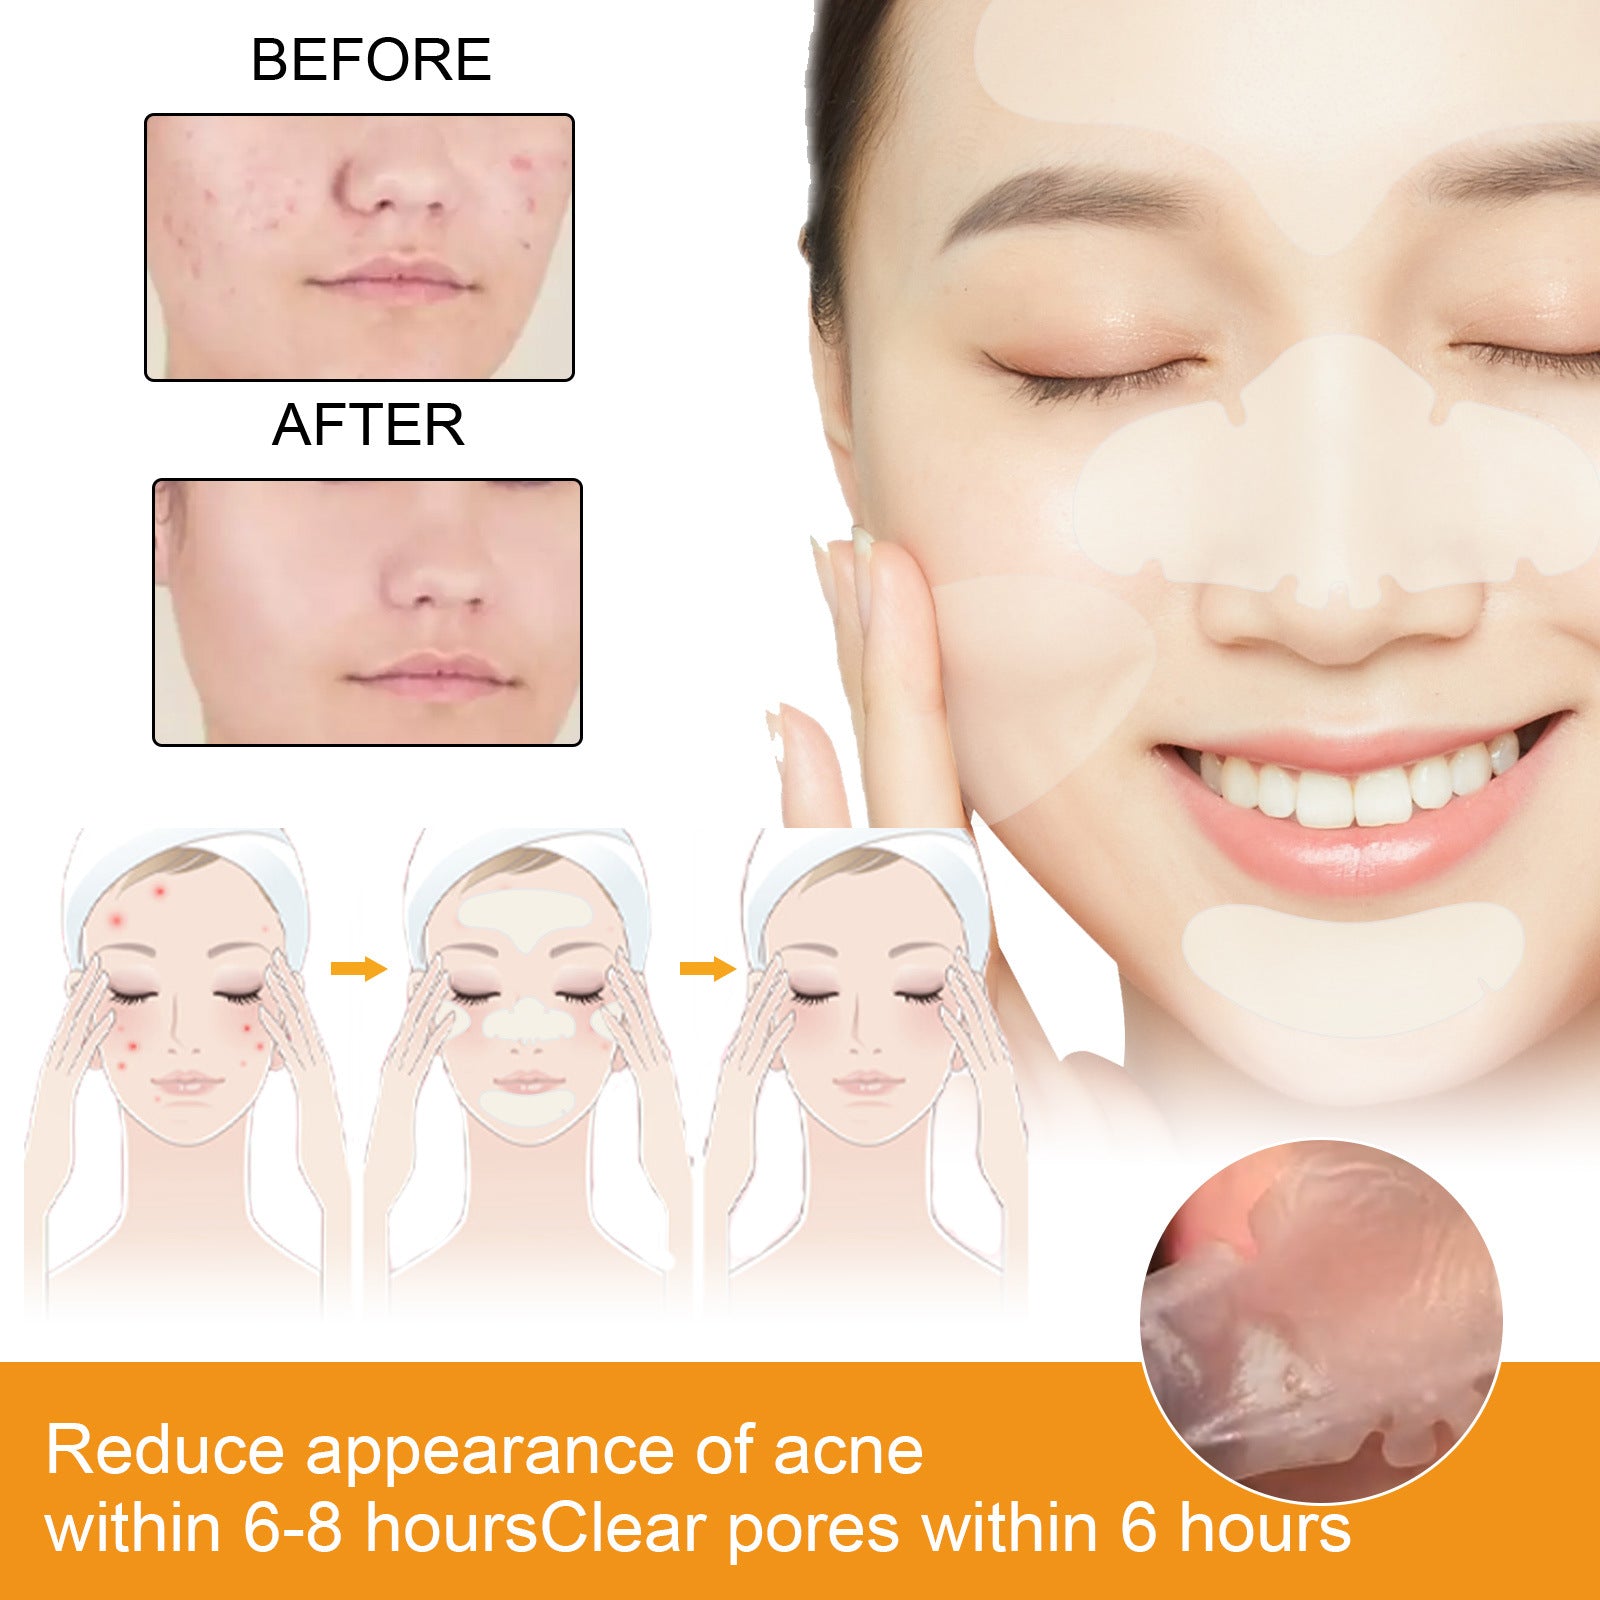 EELHOE Hydrogel Facial Acne Sticker Portable Transparent Invisible Hydrogel Body Facial Care Concealer Anti-Acne Sticker